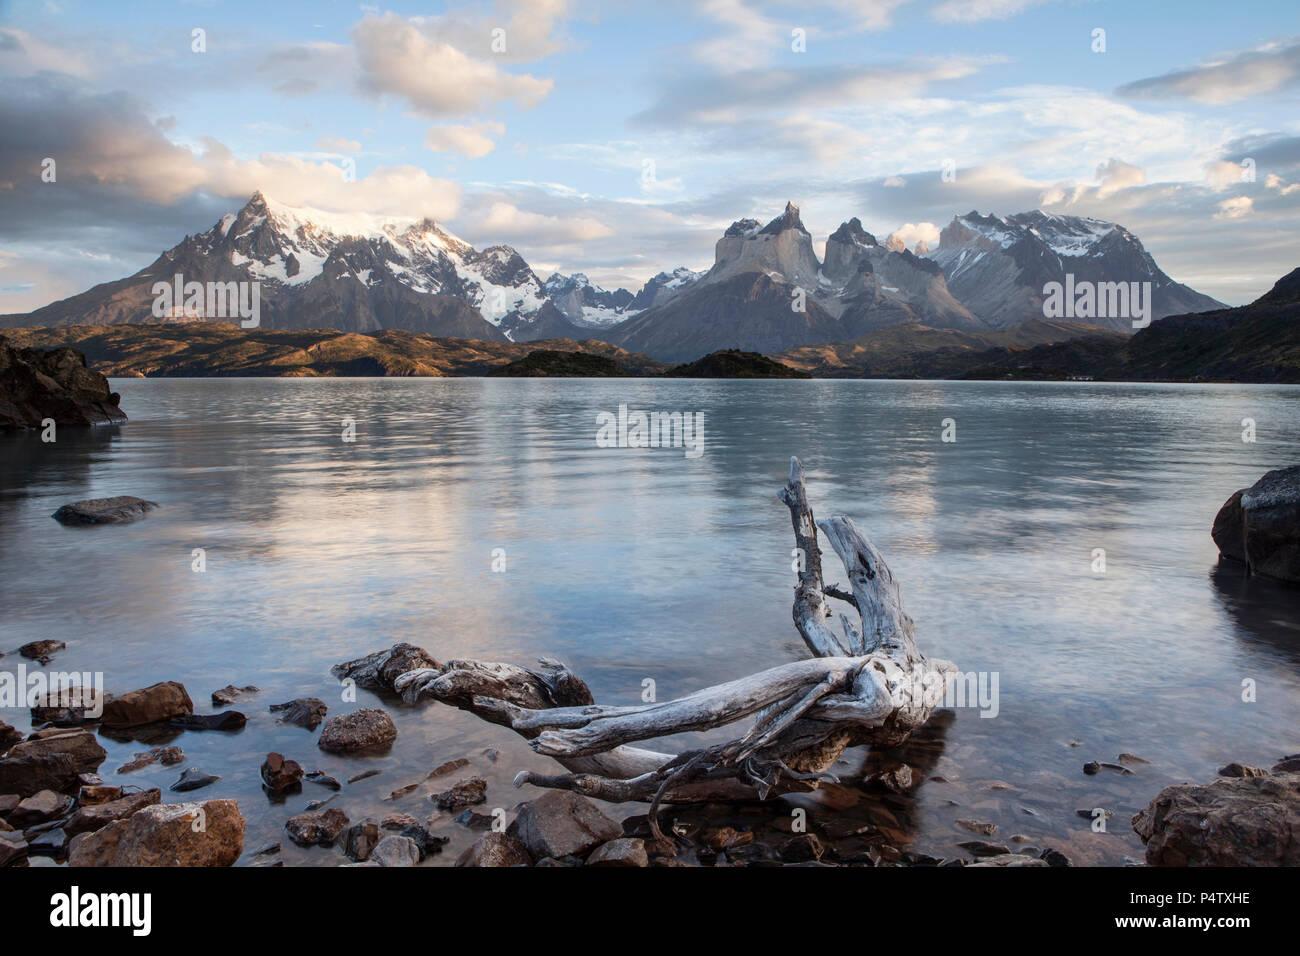 South America, Chile, Patagonia, Torres del Paine National Park, Cuernos del Paine, Lake Pehoe Stock Photo